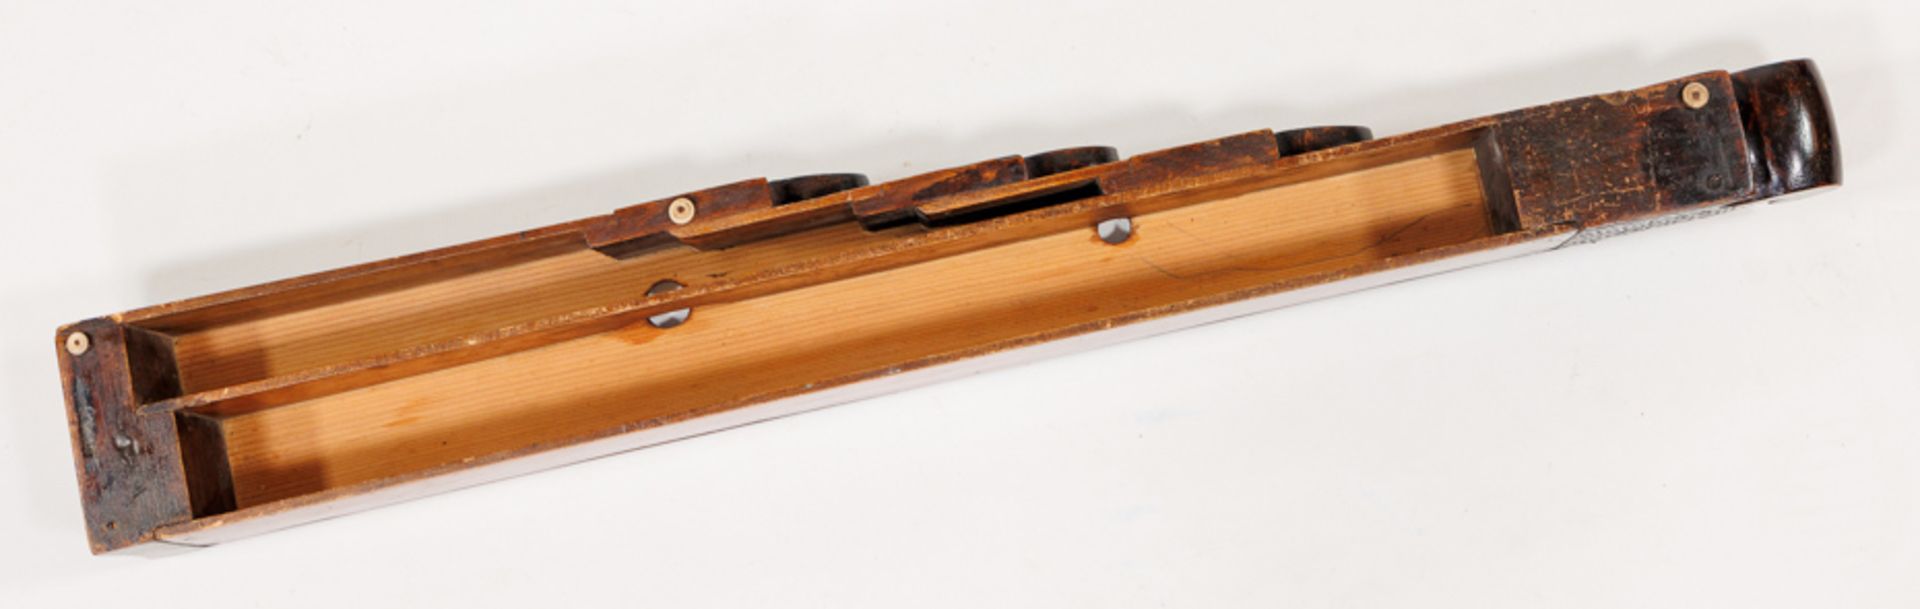 CONVOLUTE DOVECOTE ZITHER AND SMALL-HEADED ZITHER/CITERA, HUNGARY, 19TH/20TH CENTURY - Image 7 of 9